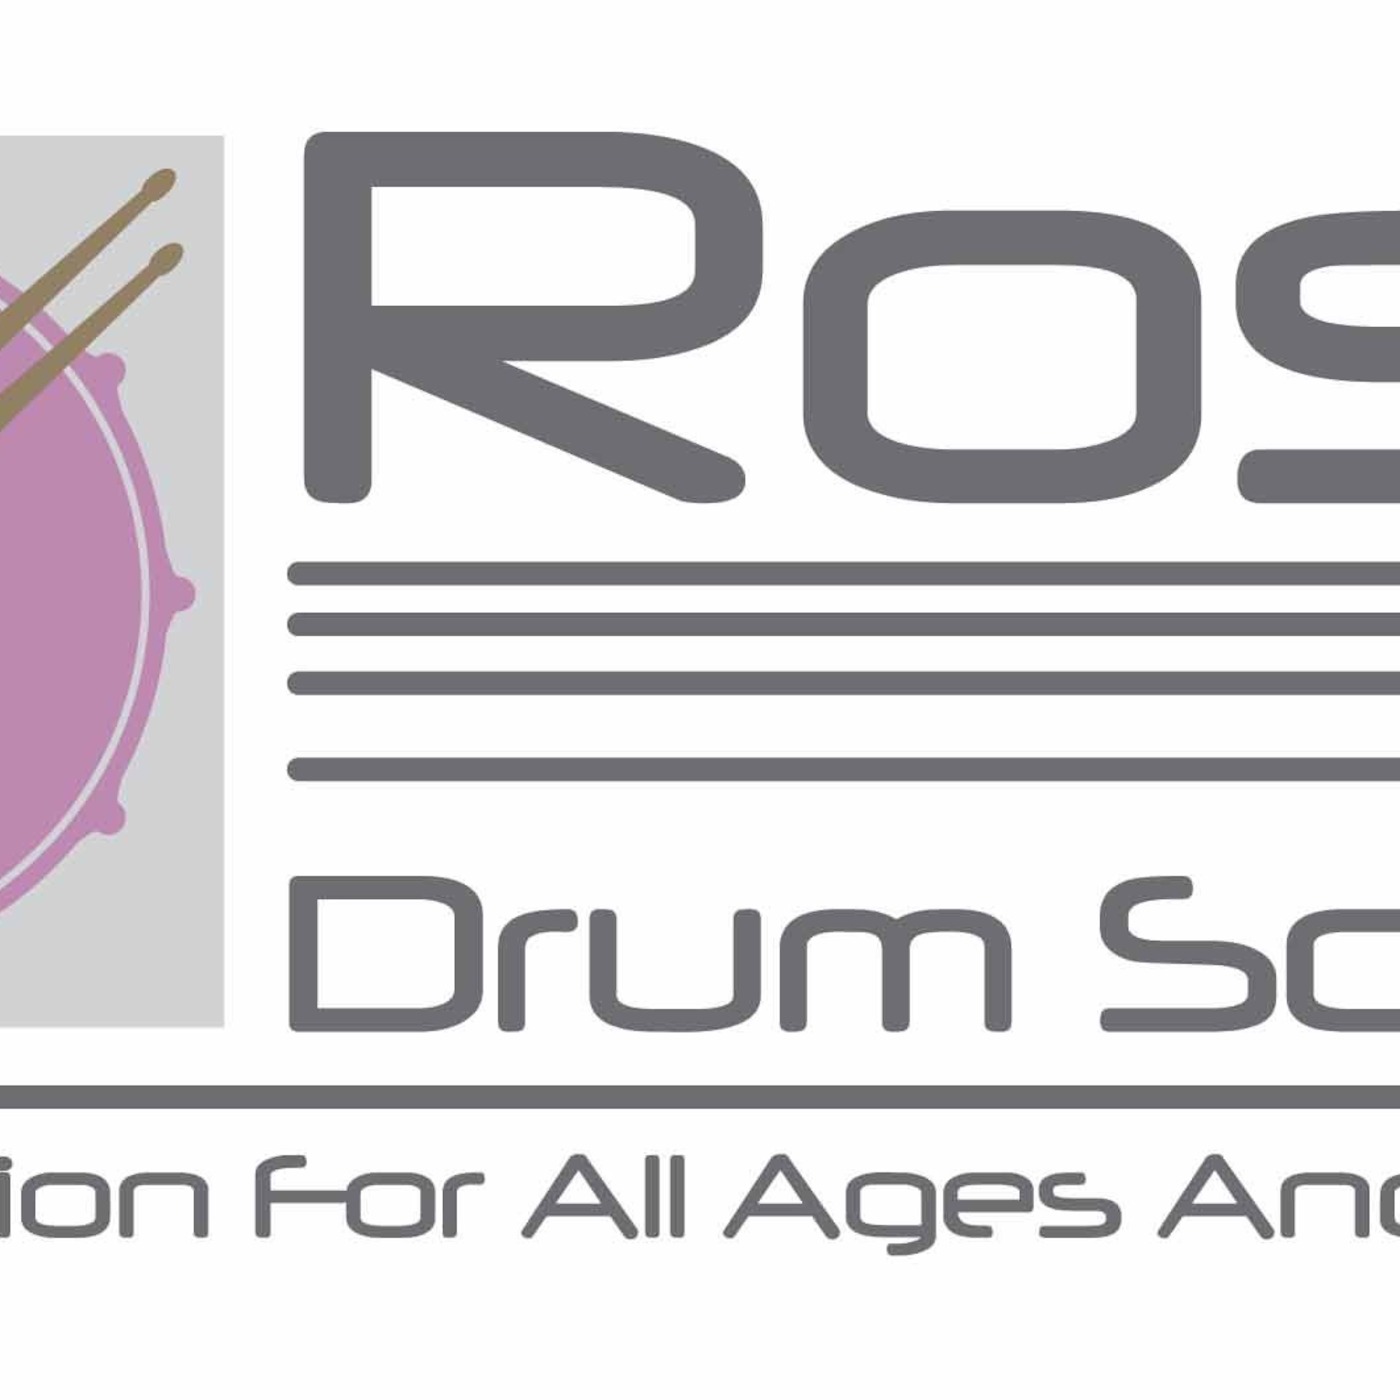 Free Drum Lessons, Videos and Chat from Rose Drum School Podcasts